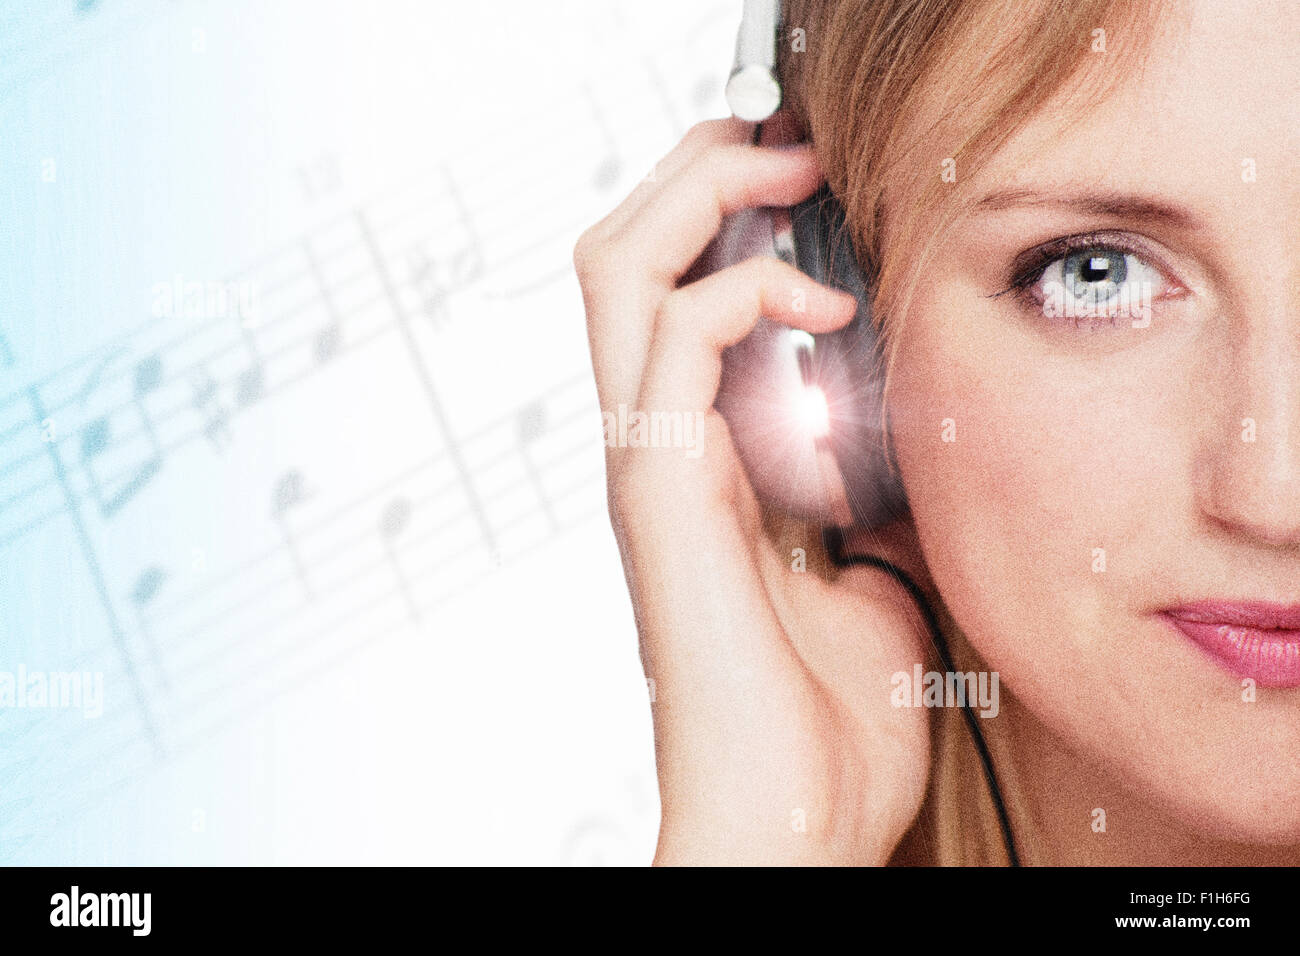 Blonde woman wearing headphones listening to music Banque D'Images